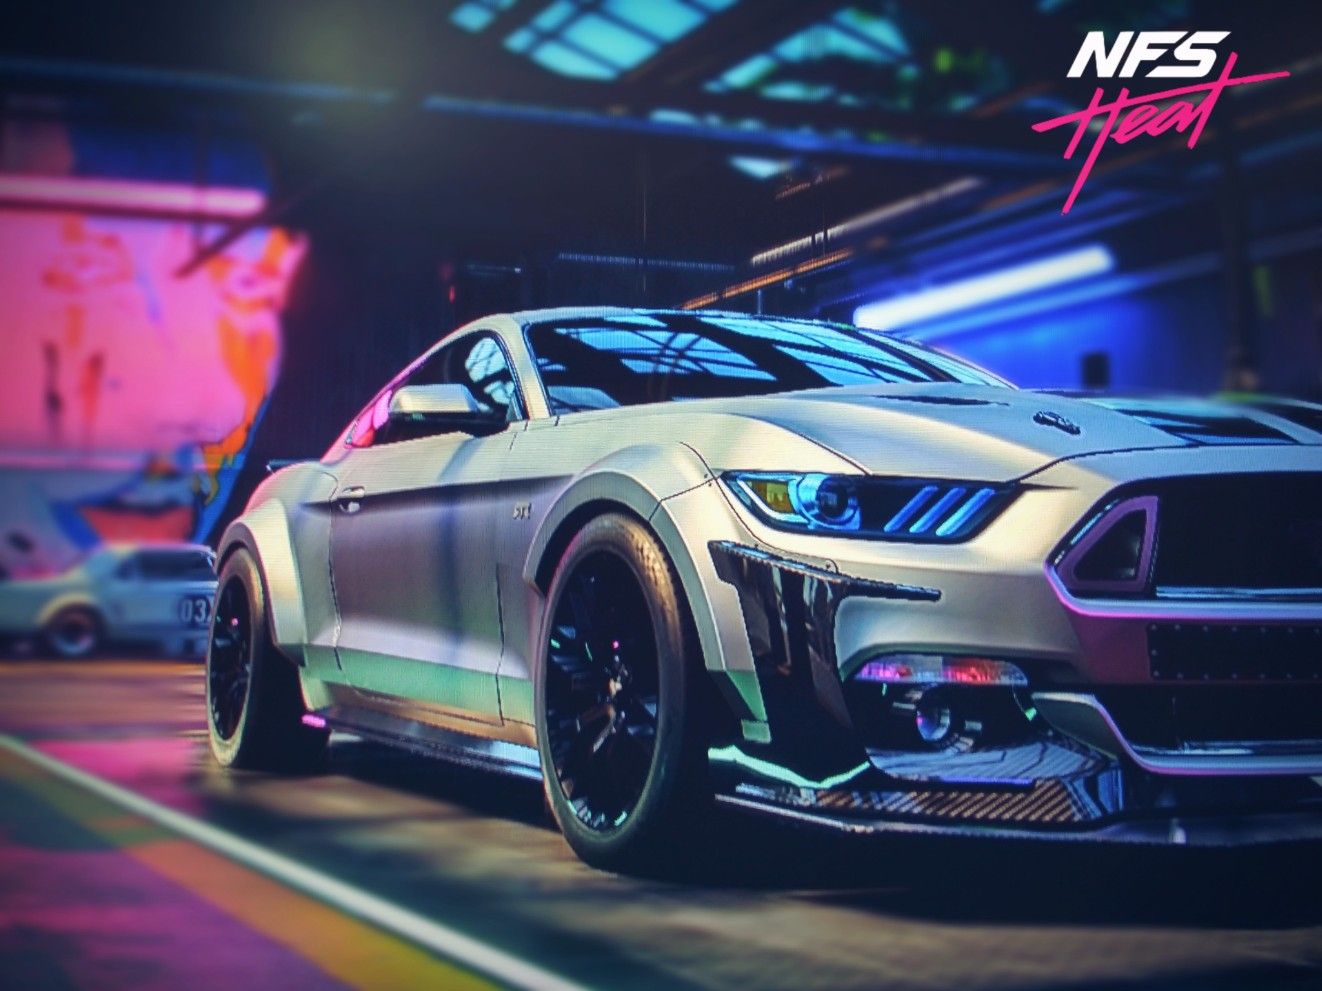 Ford Mustang Need For Speed Wallpapers